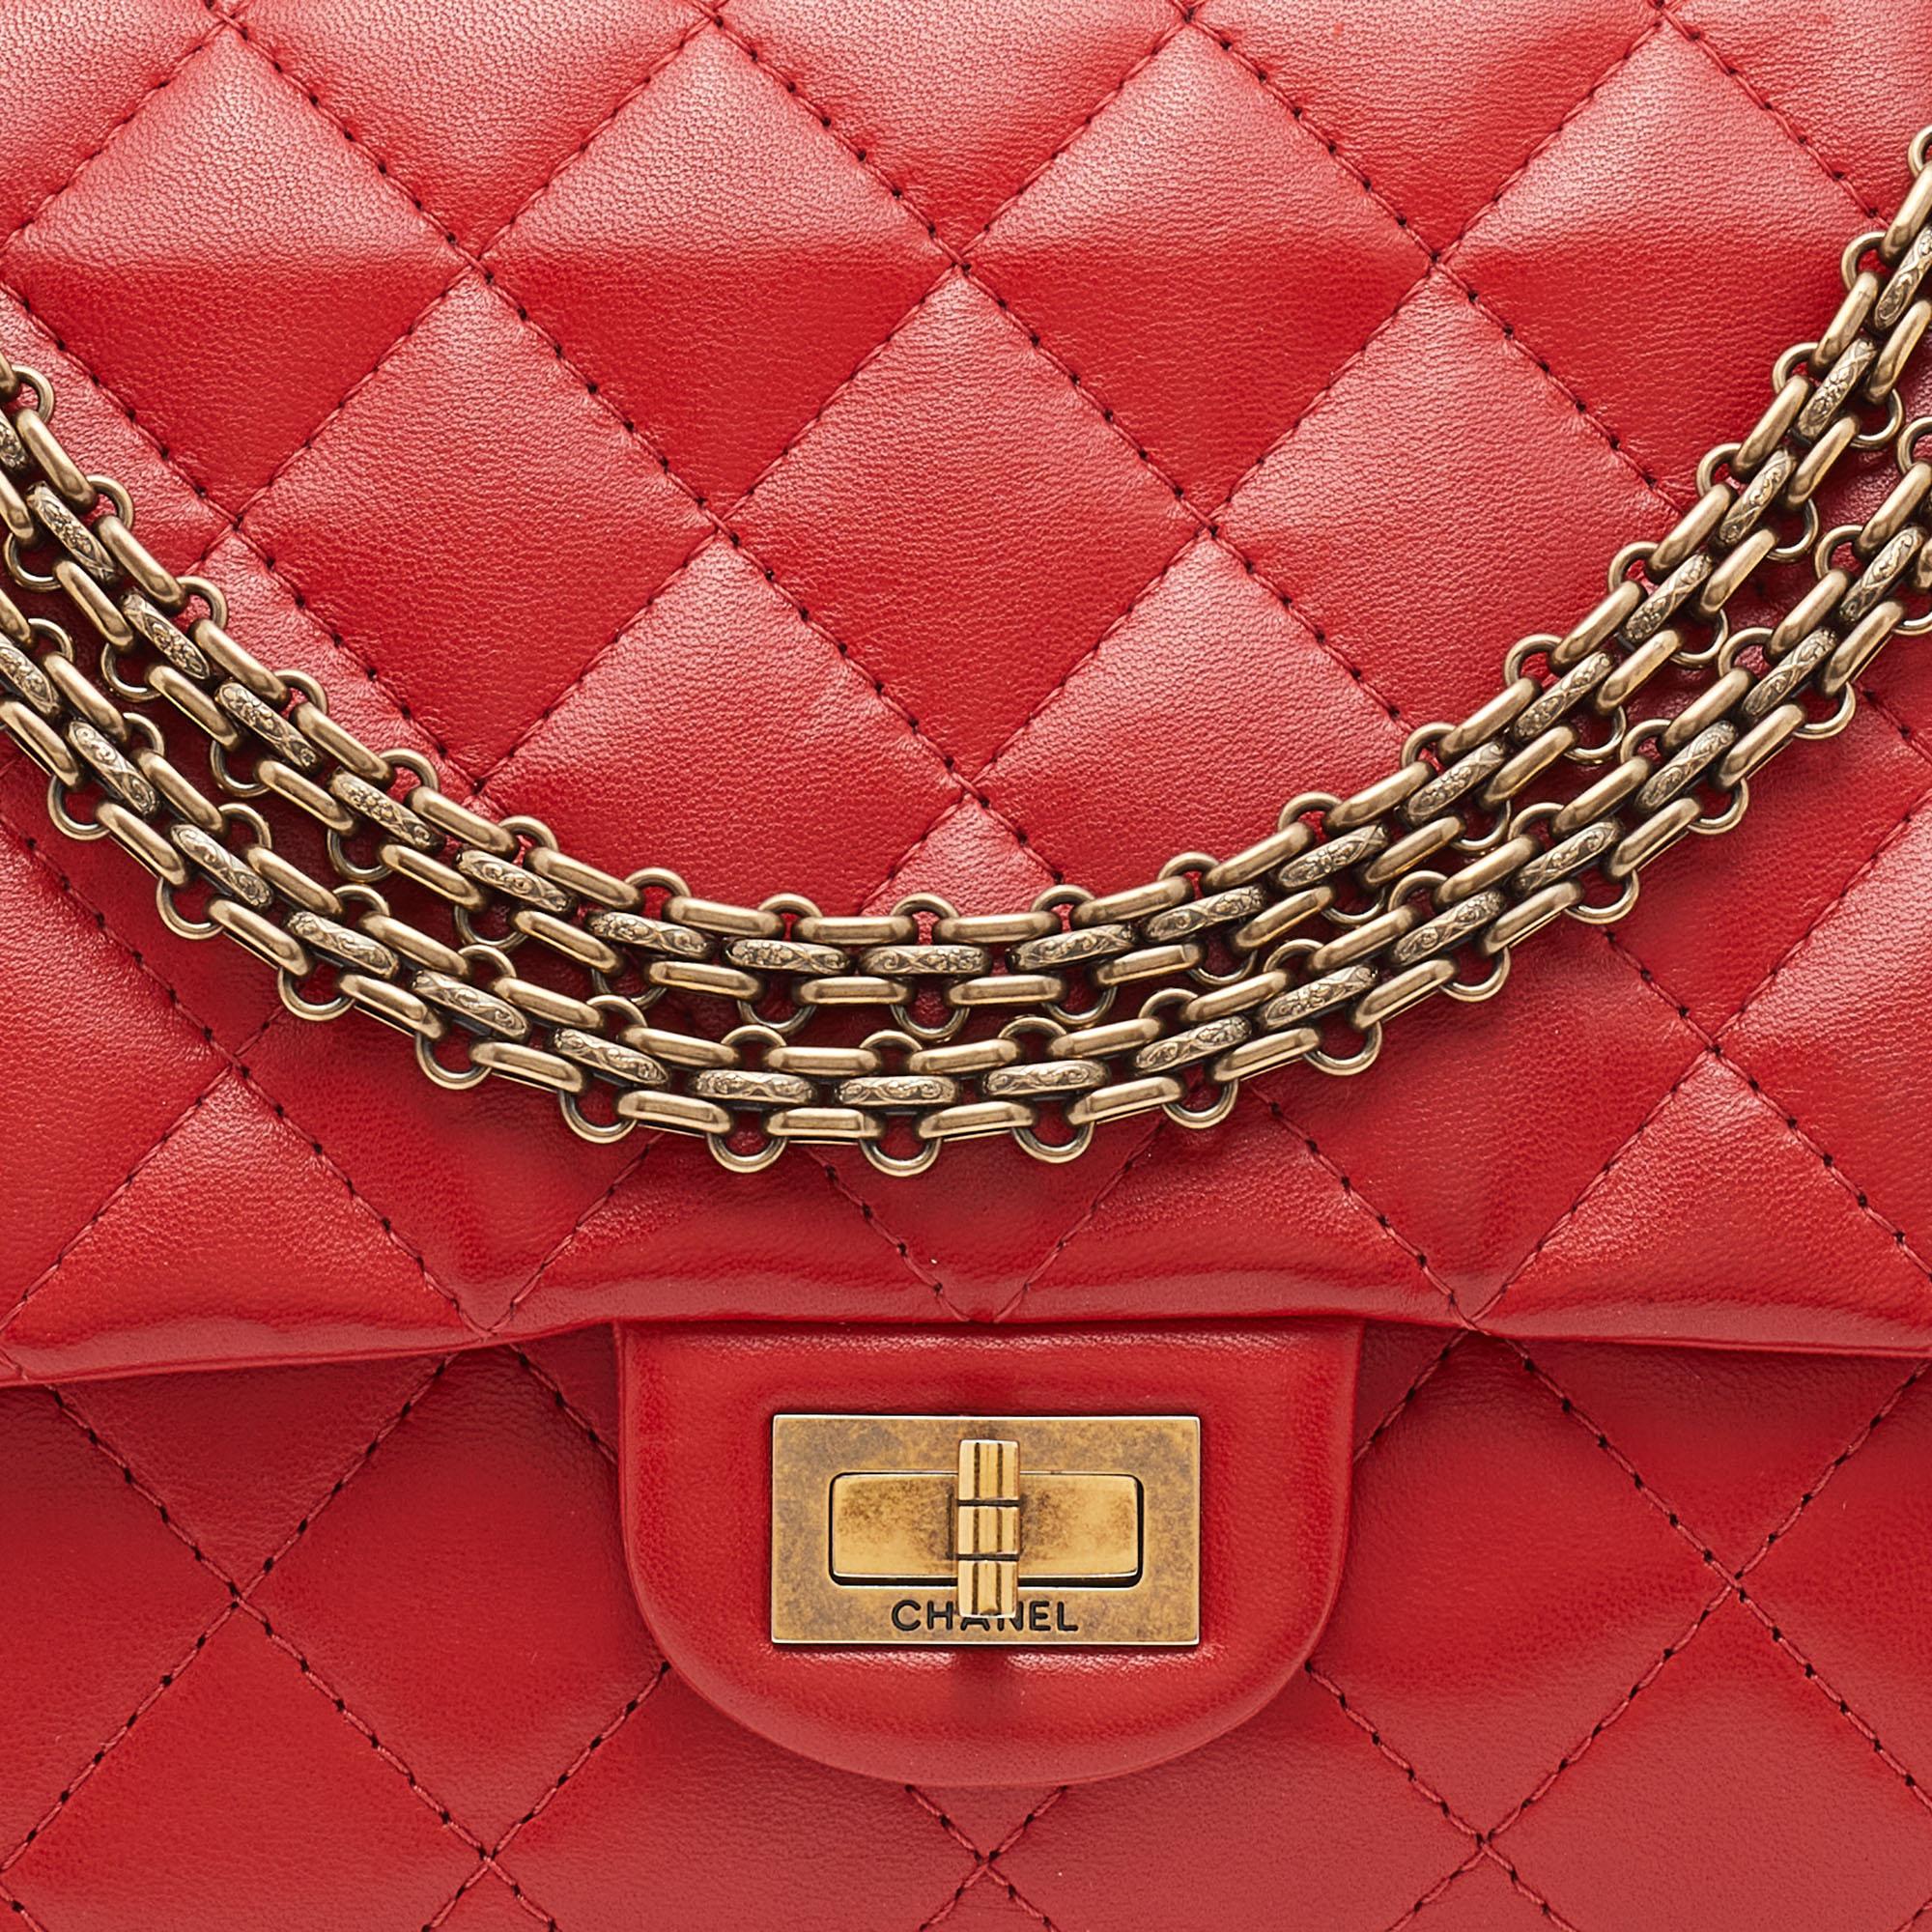 Chanel Red Lipstick Quilted Leather Reissue 2.55 Classic 226 Flap Bag 3